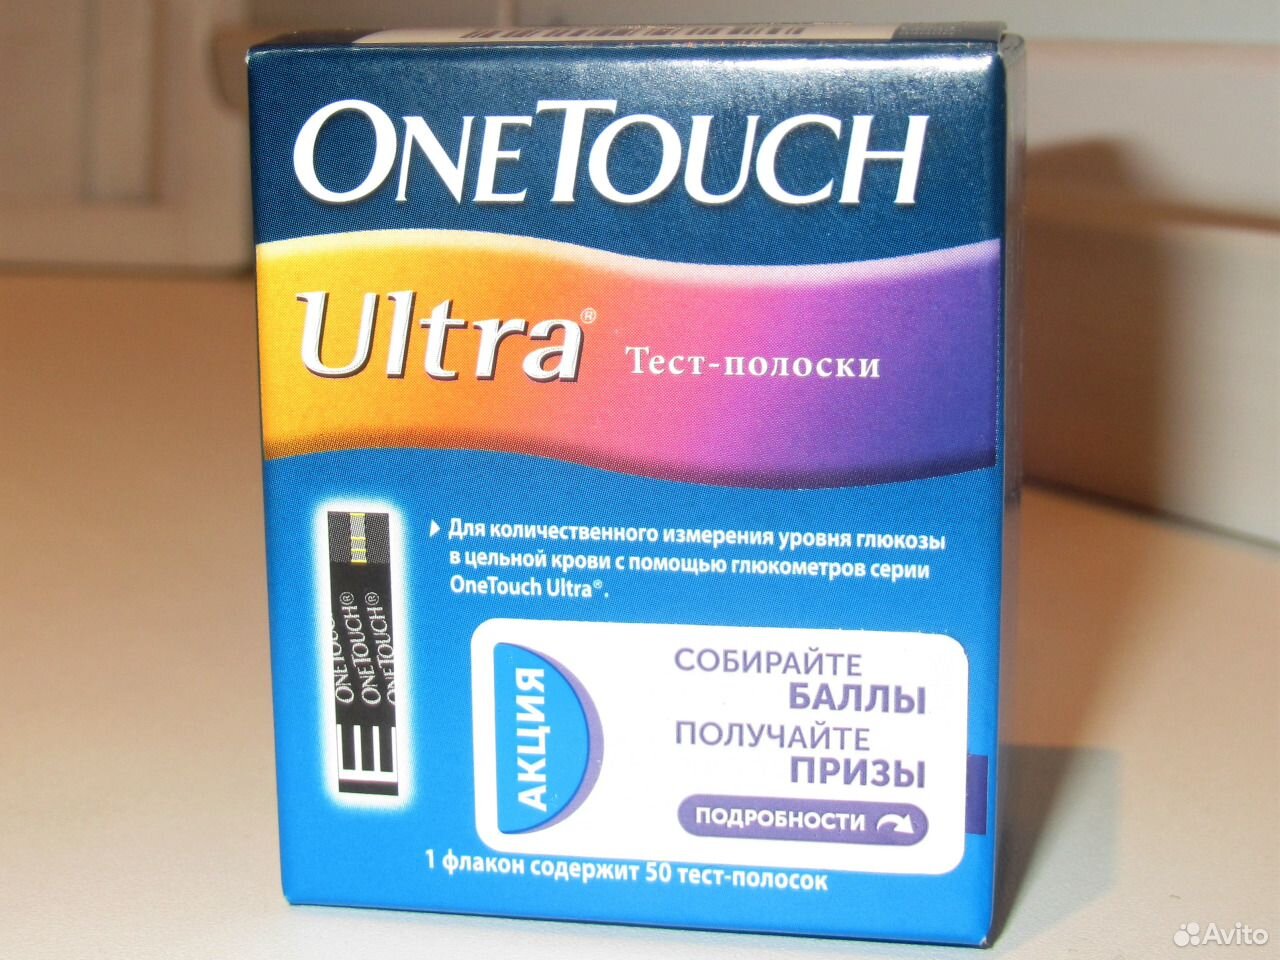 One touch полоски цена. Ван тач ультра полоски. Полоски глюкометров ONETOUCH Ultra. Полоски для глюкометра one Touch Ultra. Тест полоски ONETOUCH Ultra 50.